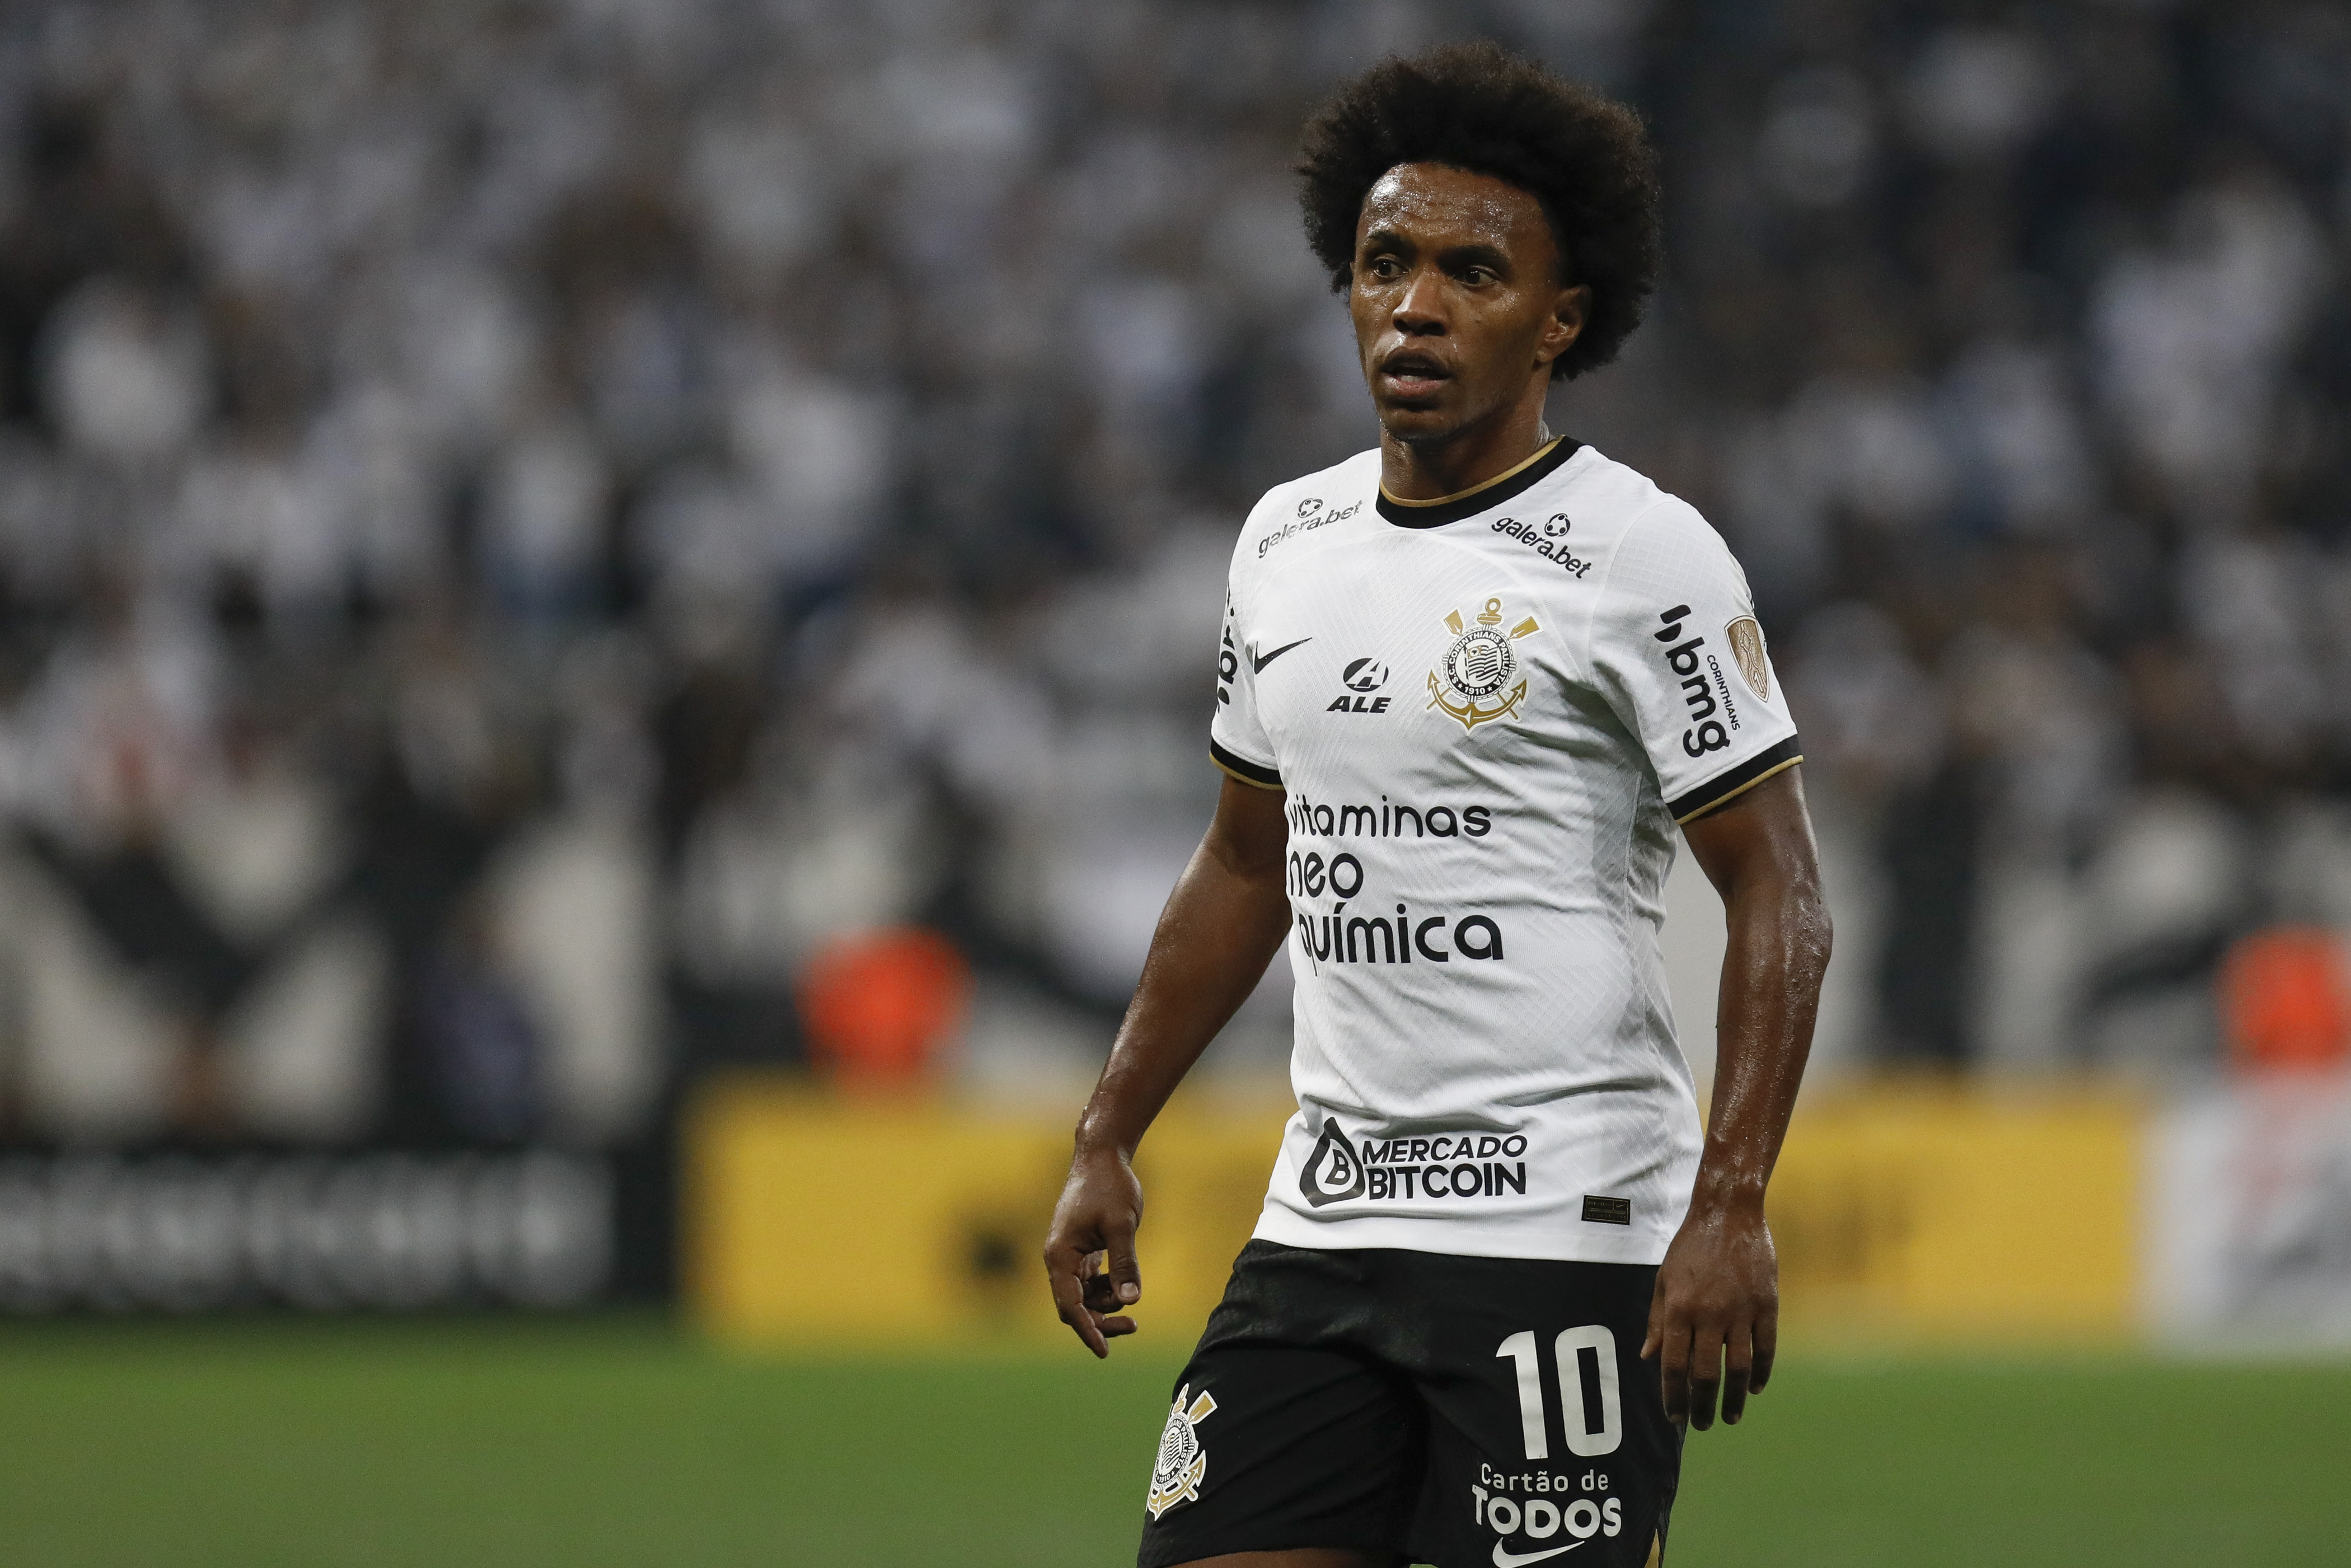 Fulham are in talks to sign Willian after he left Corinthians